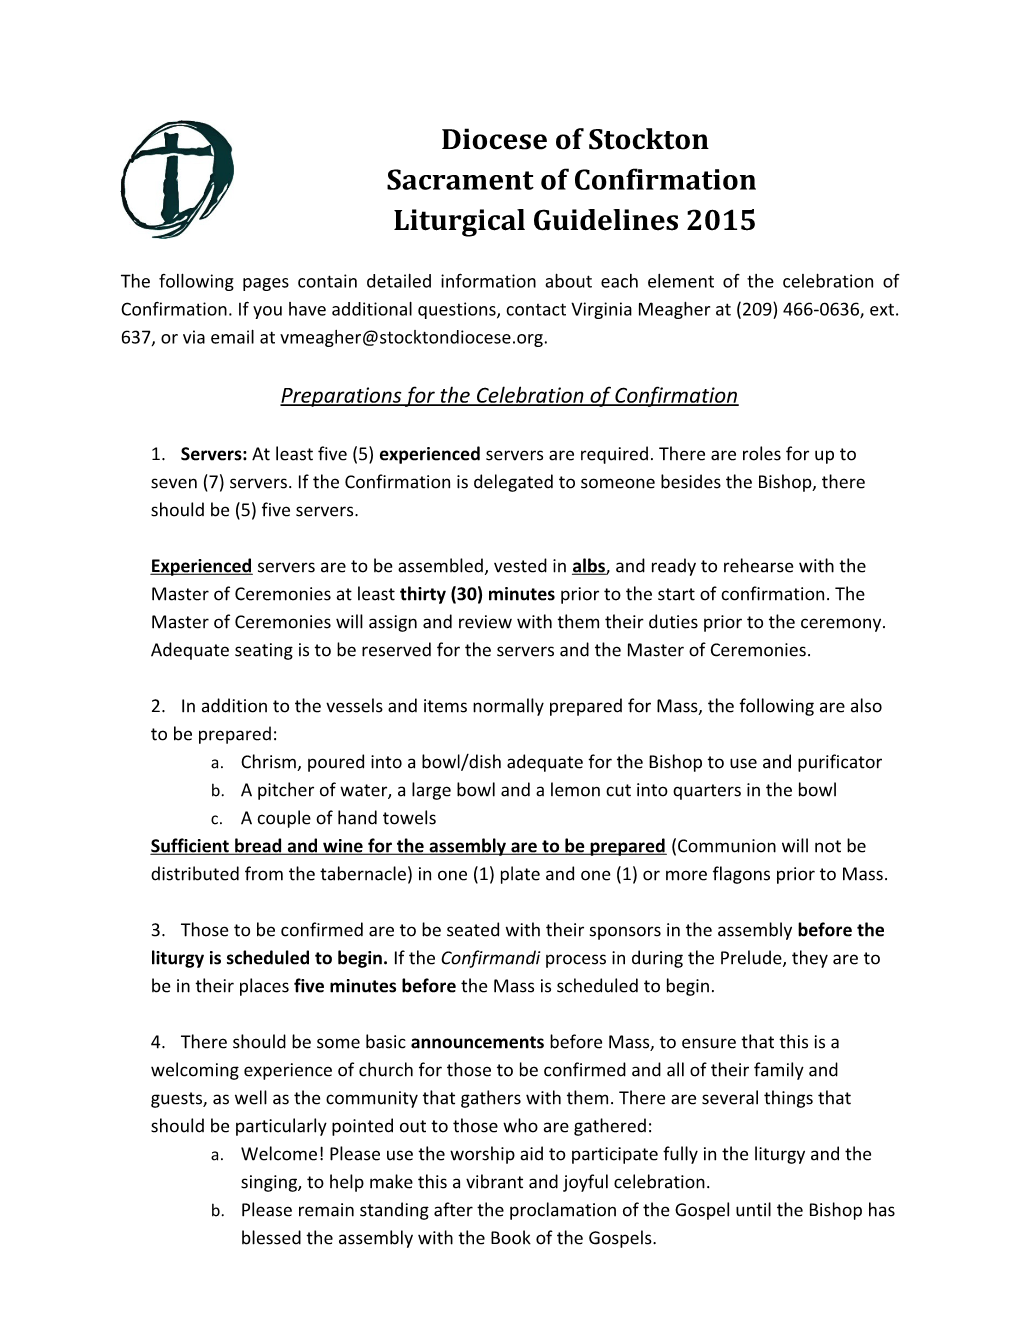 Sacrament of Confirmation Liturgical Guidelines 2015